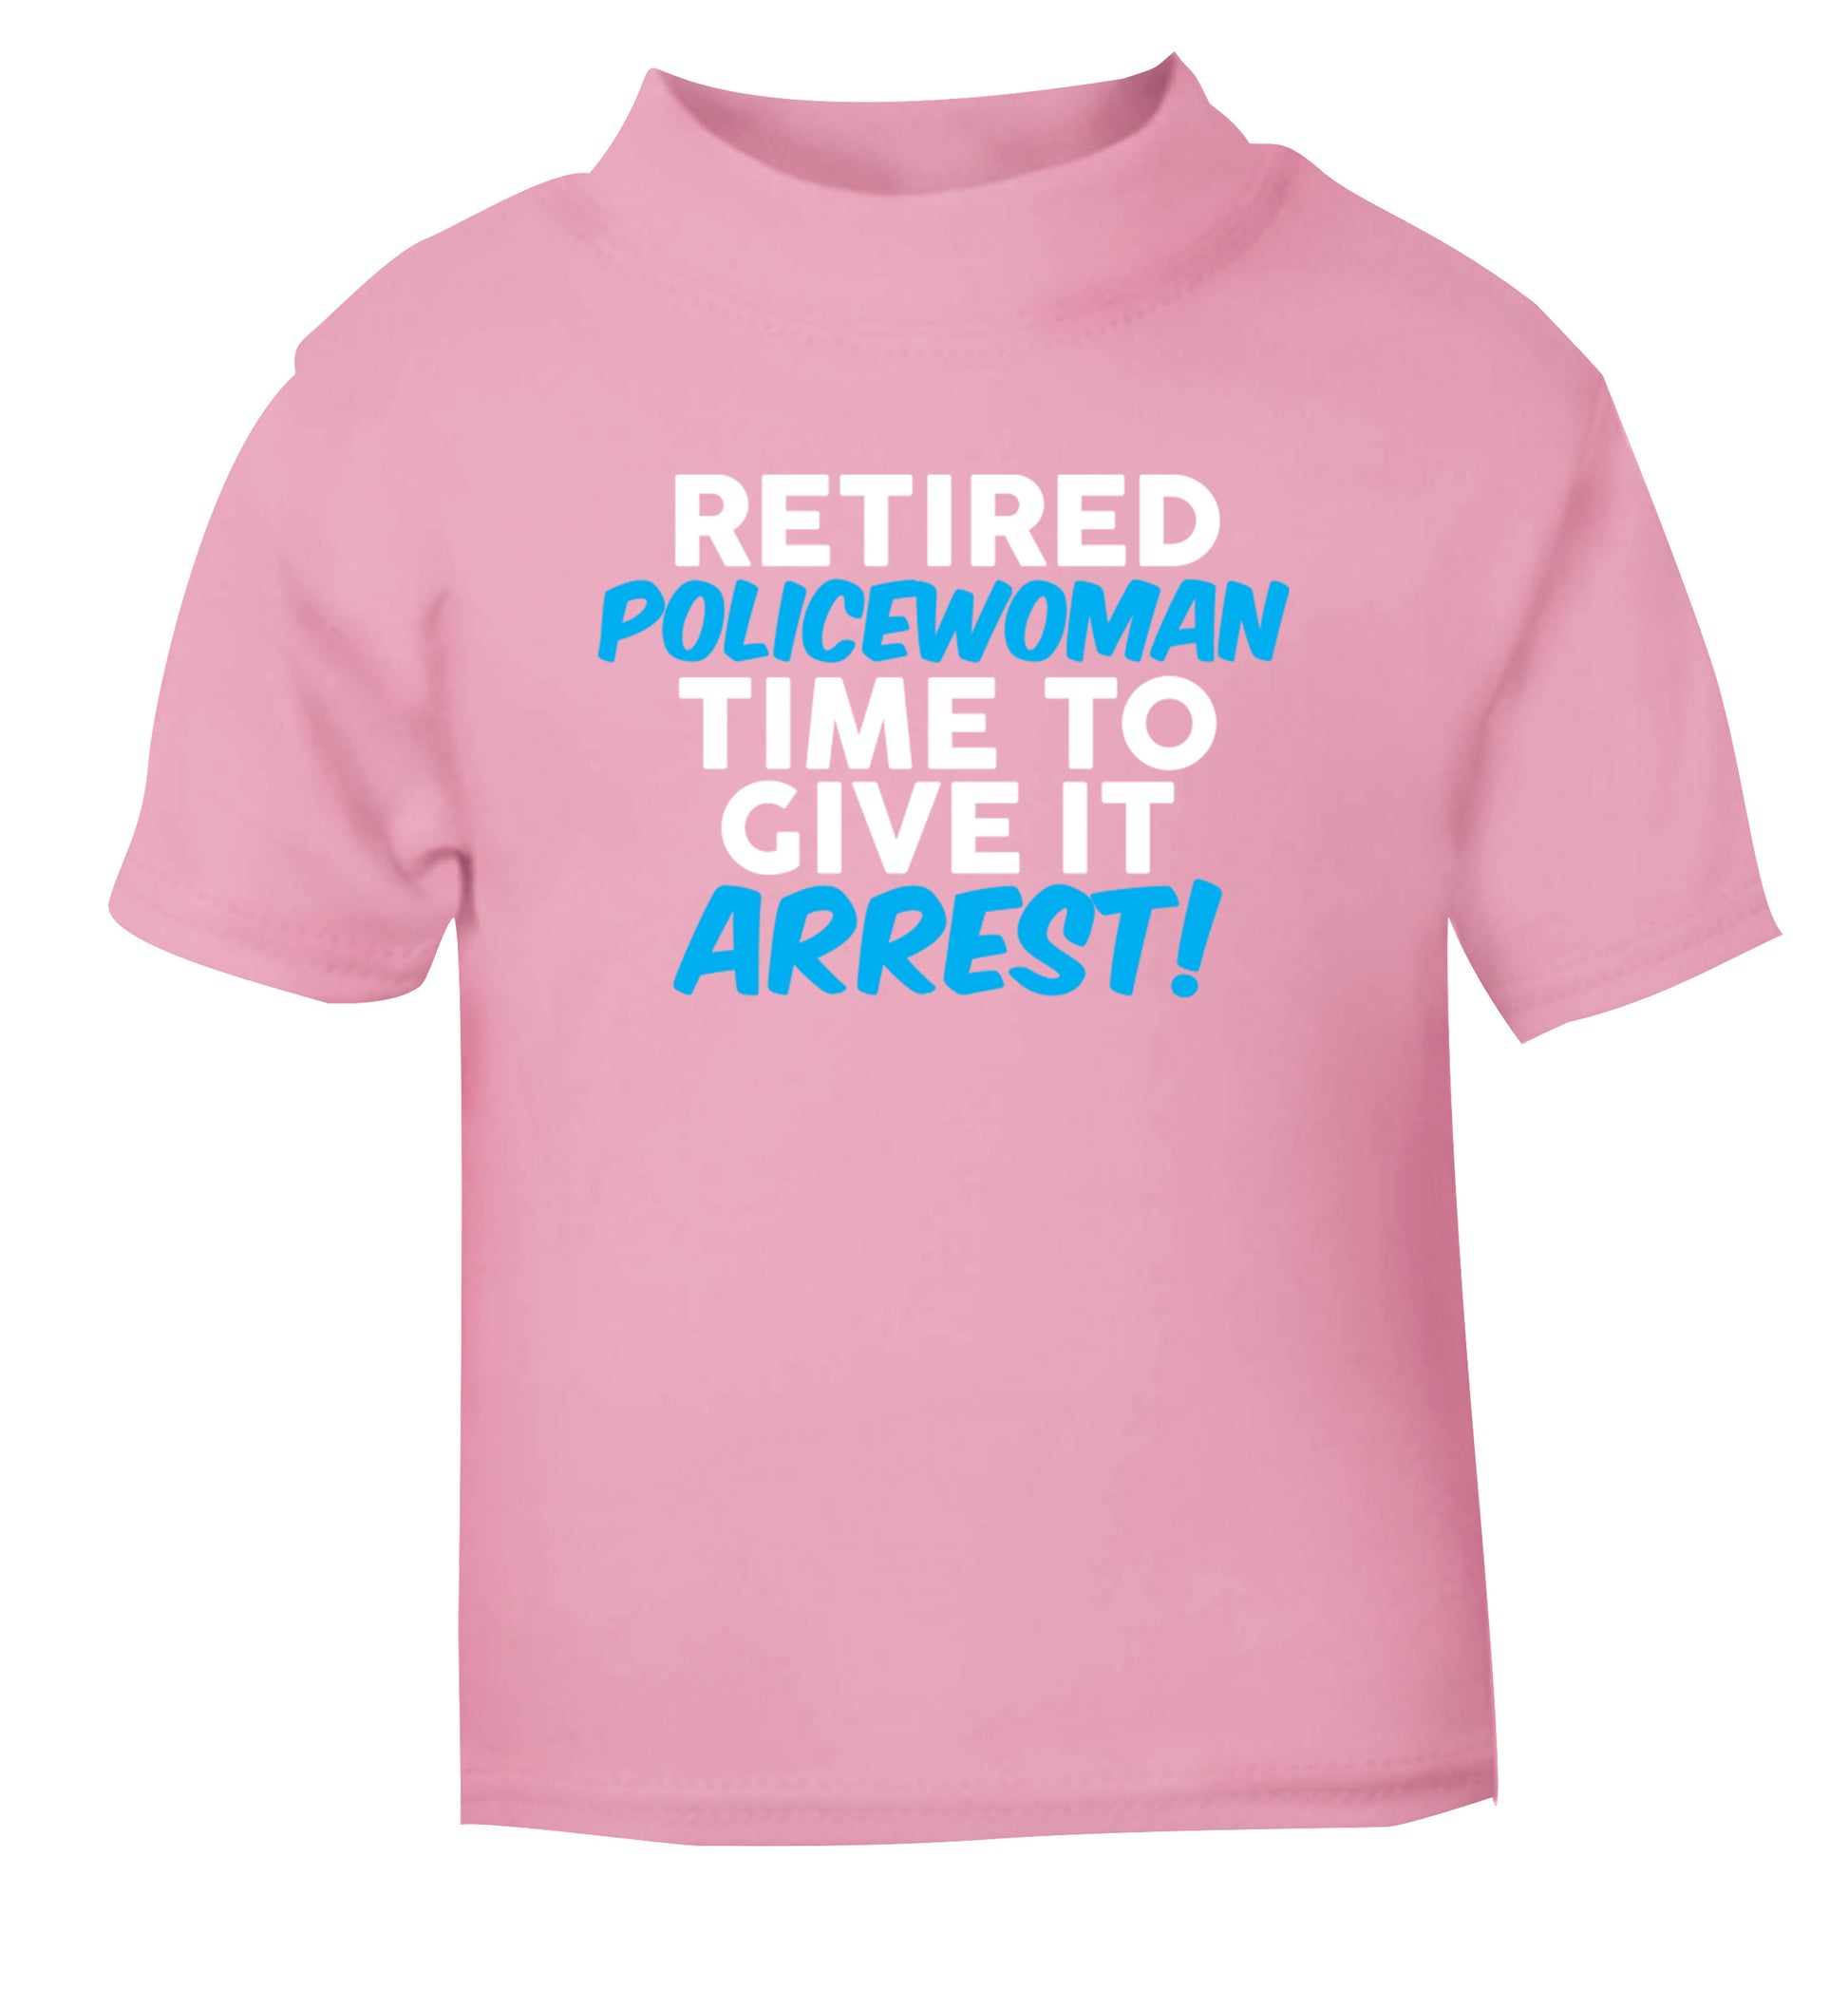 Retired policewoman time to give it arrest light pink Baby Toddler Tshirt 2 Years